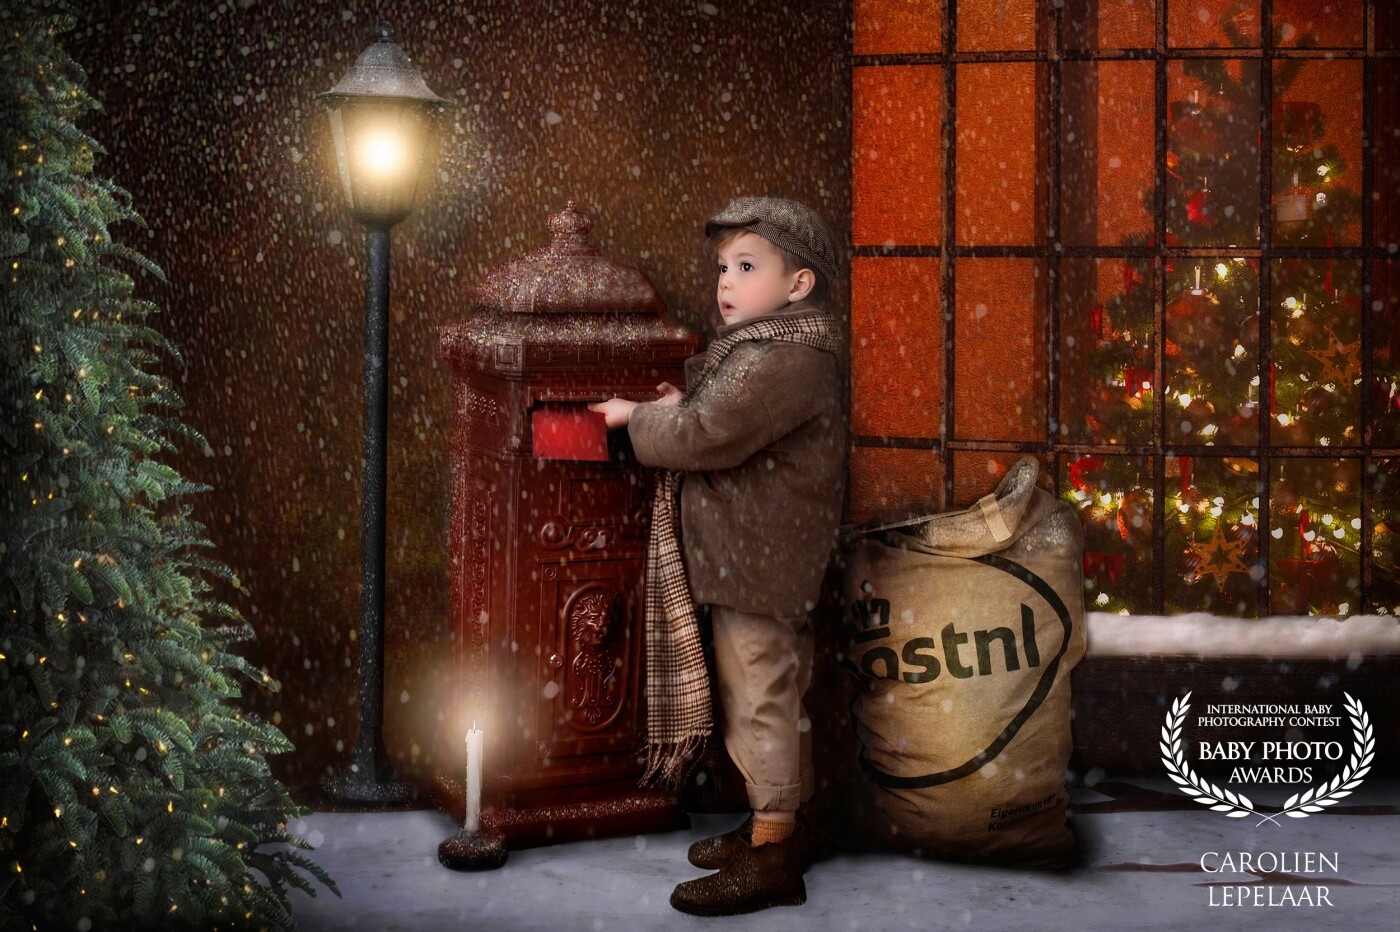 This image is a true Christmas story for me. This little boy walks with his candle and a bag full of Christmas cards through the snow to send them to his loved ones. Every single detail of this image has a meaning/message. What is your story?